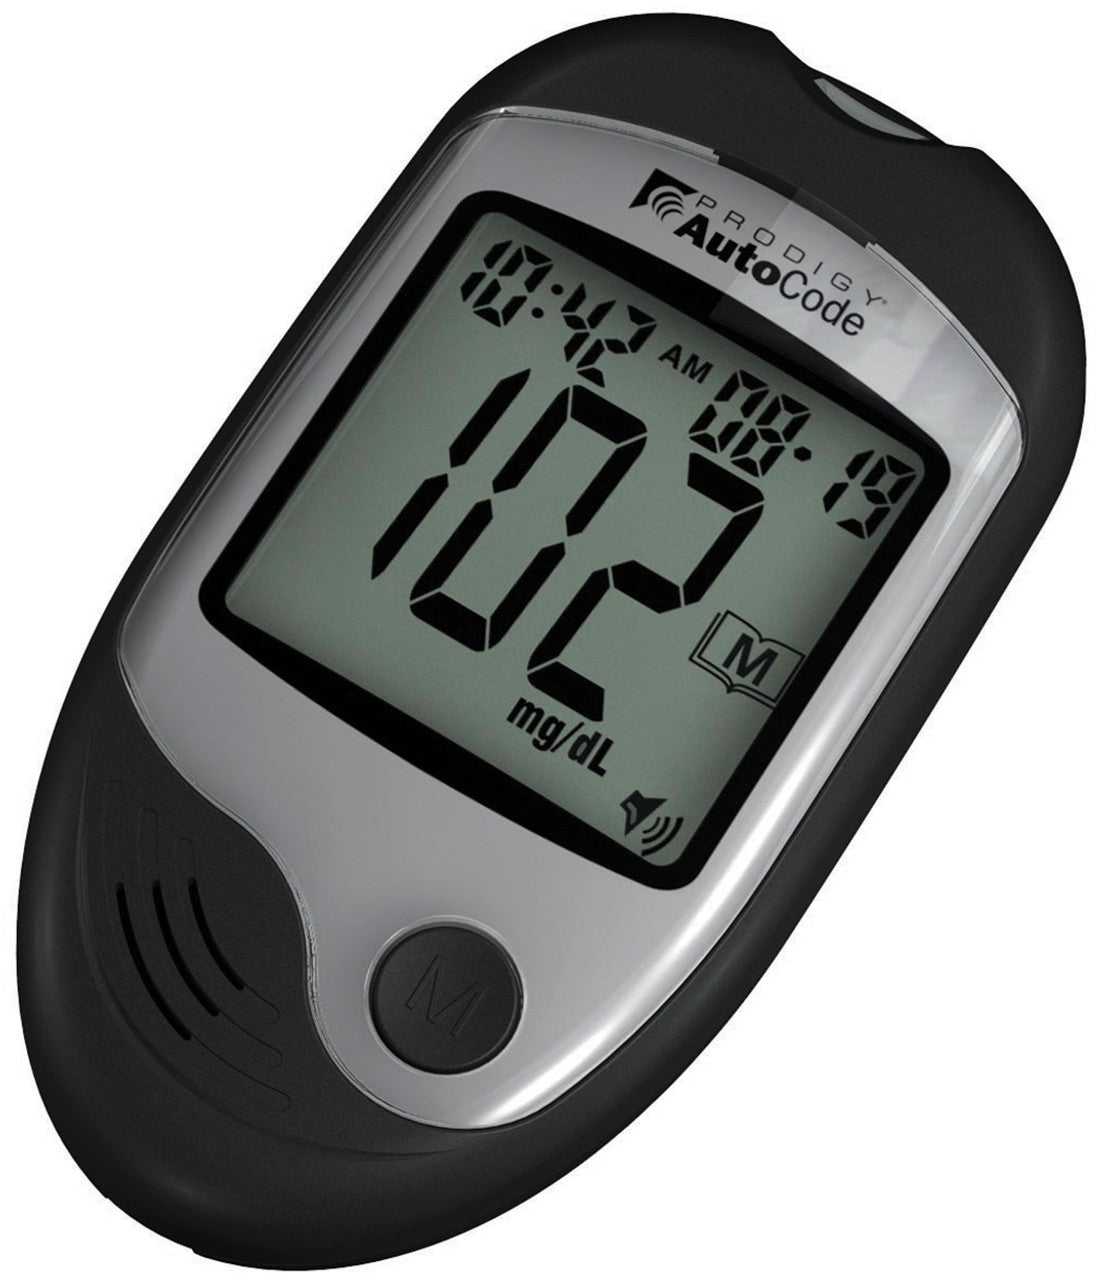 The Prodigy Autocode Talking Blood Glucose Meter eliminates the need to calibrate your meter to the strip, making the unit easier to use for blind or partially sighted, eliminating false results caused by coding errors.